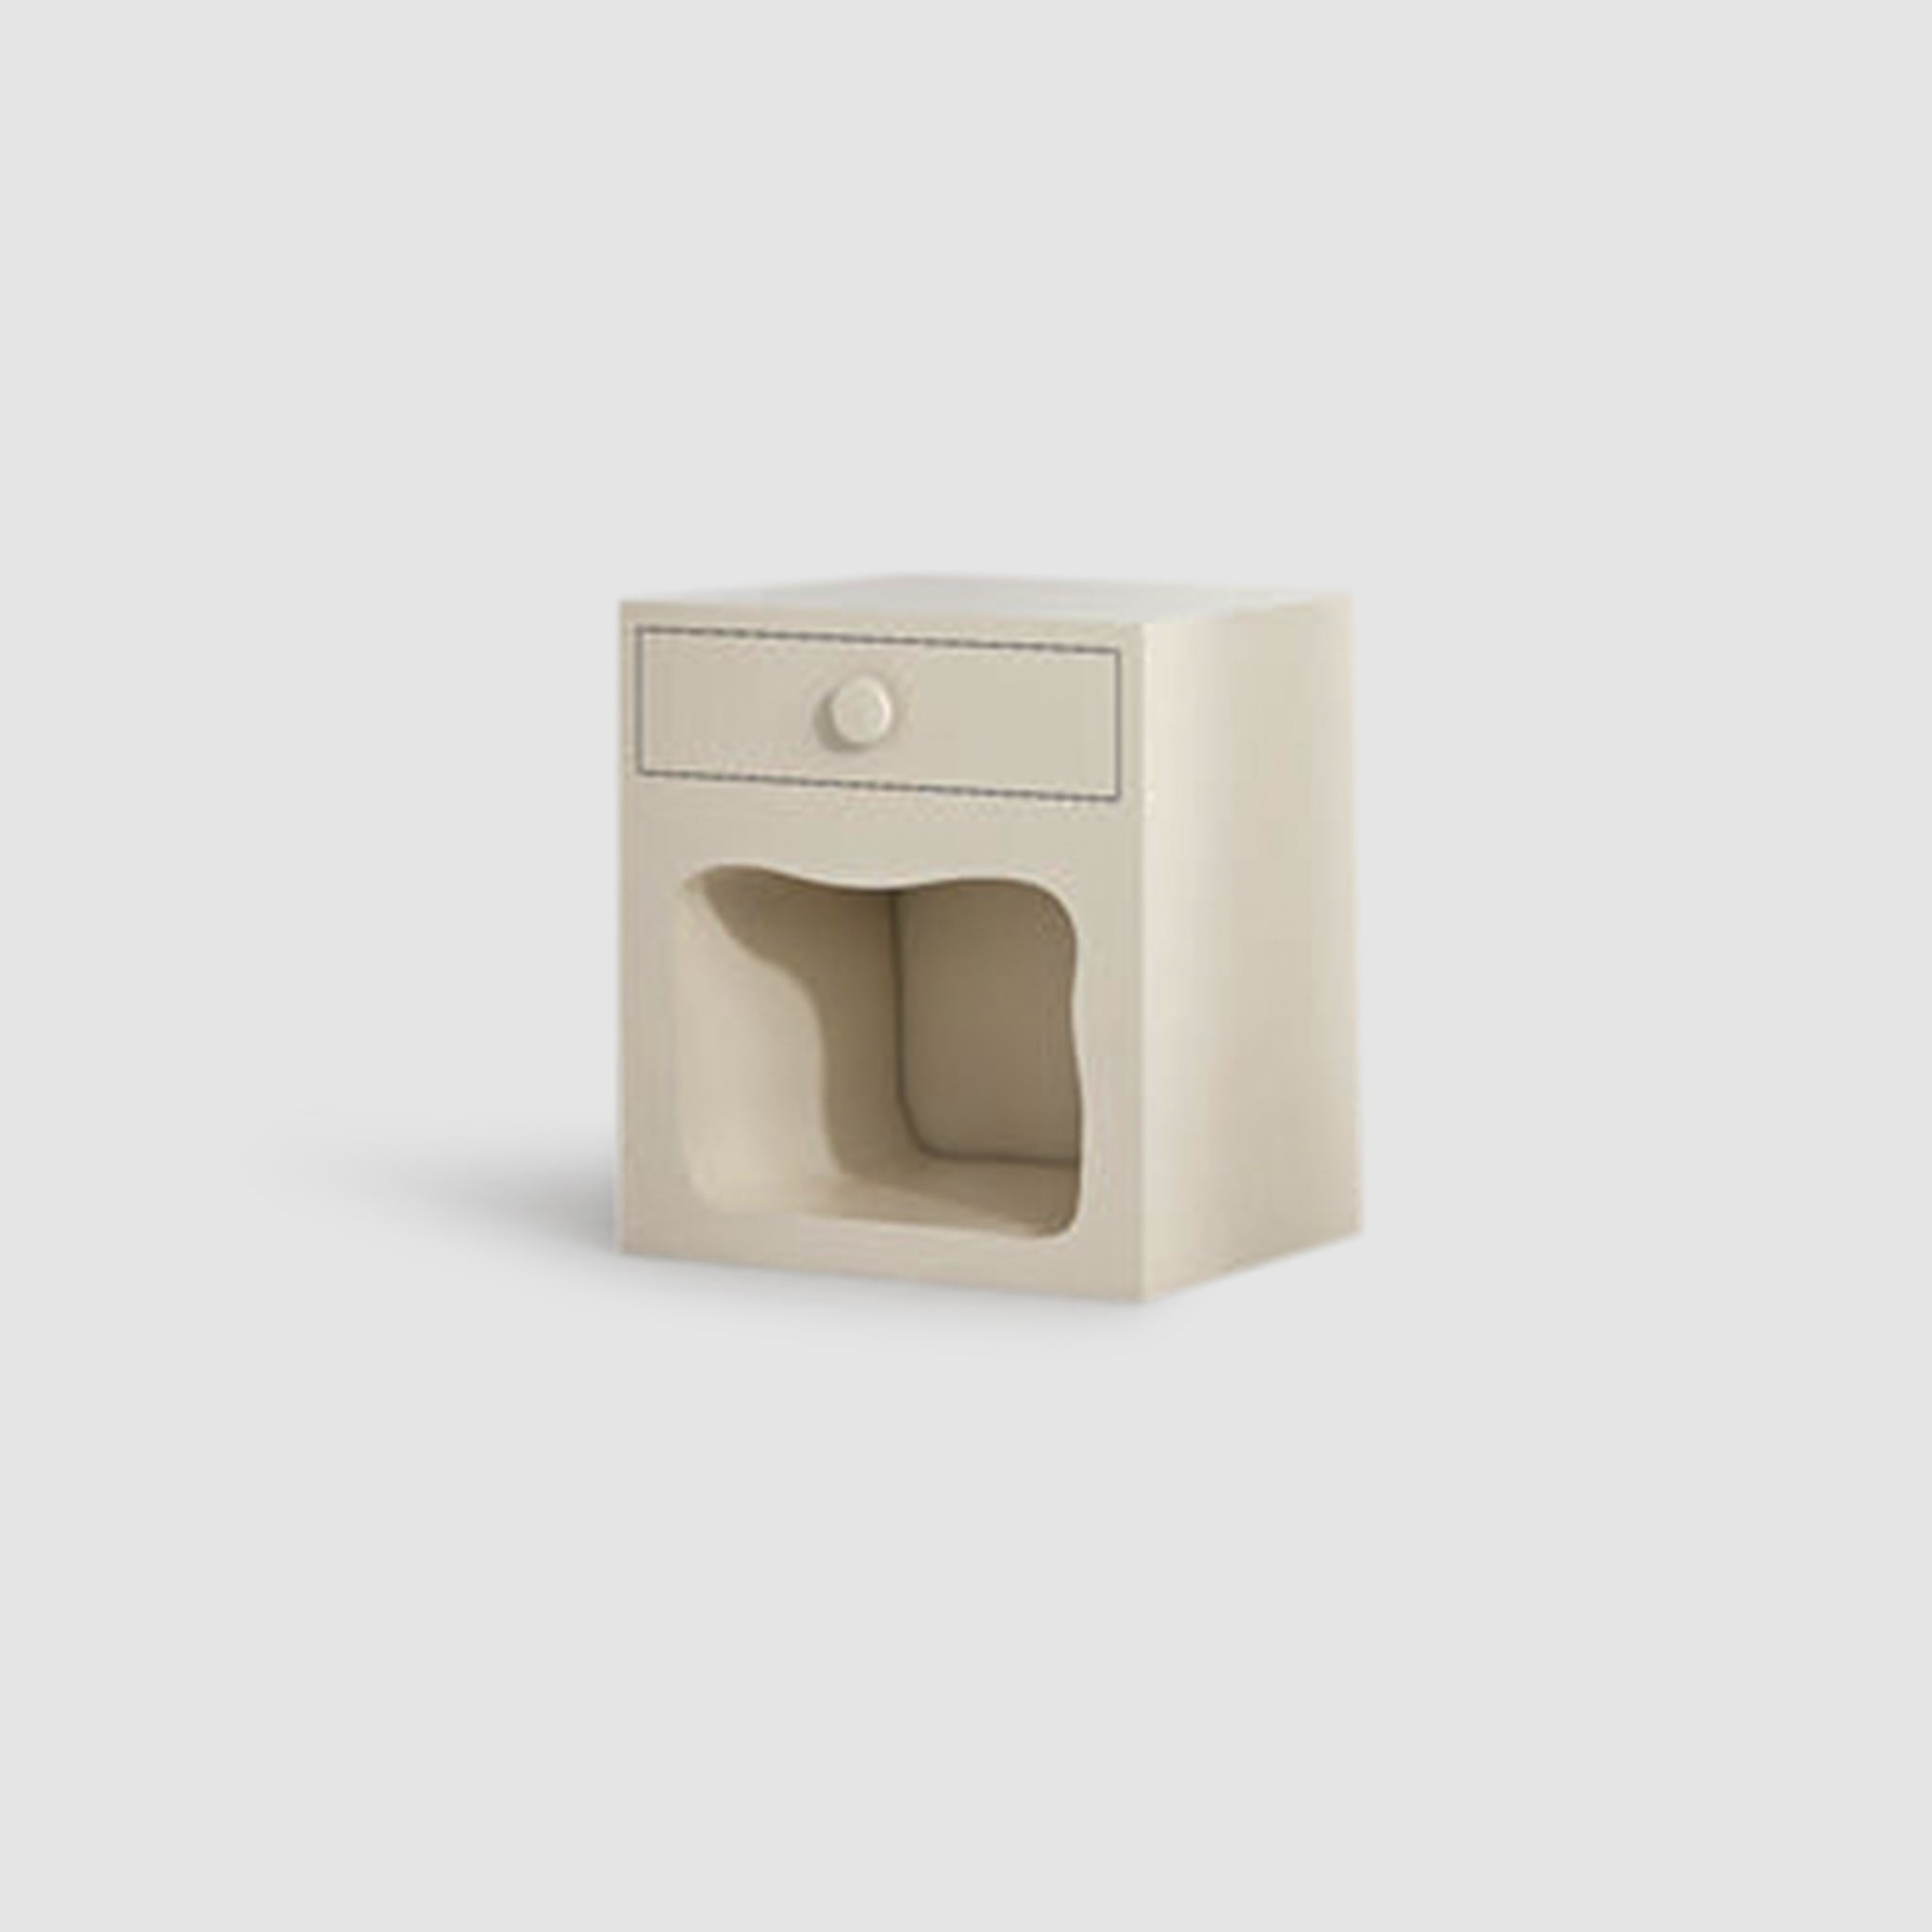 Beside table with a hidden compartment for storing valuables.